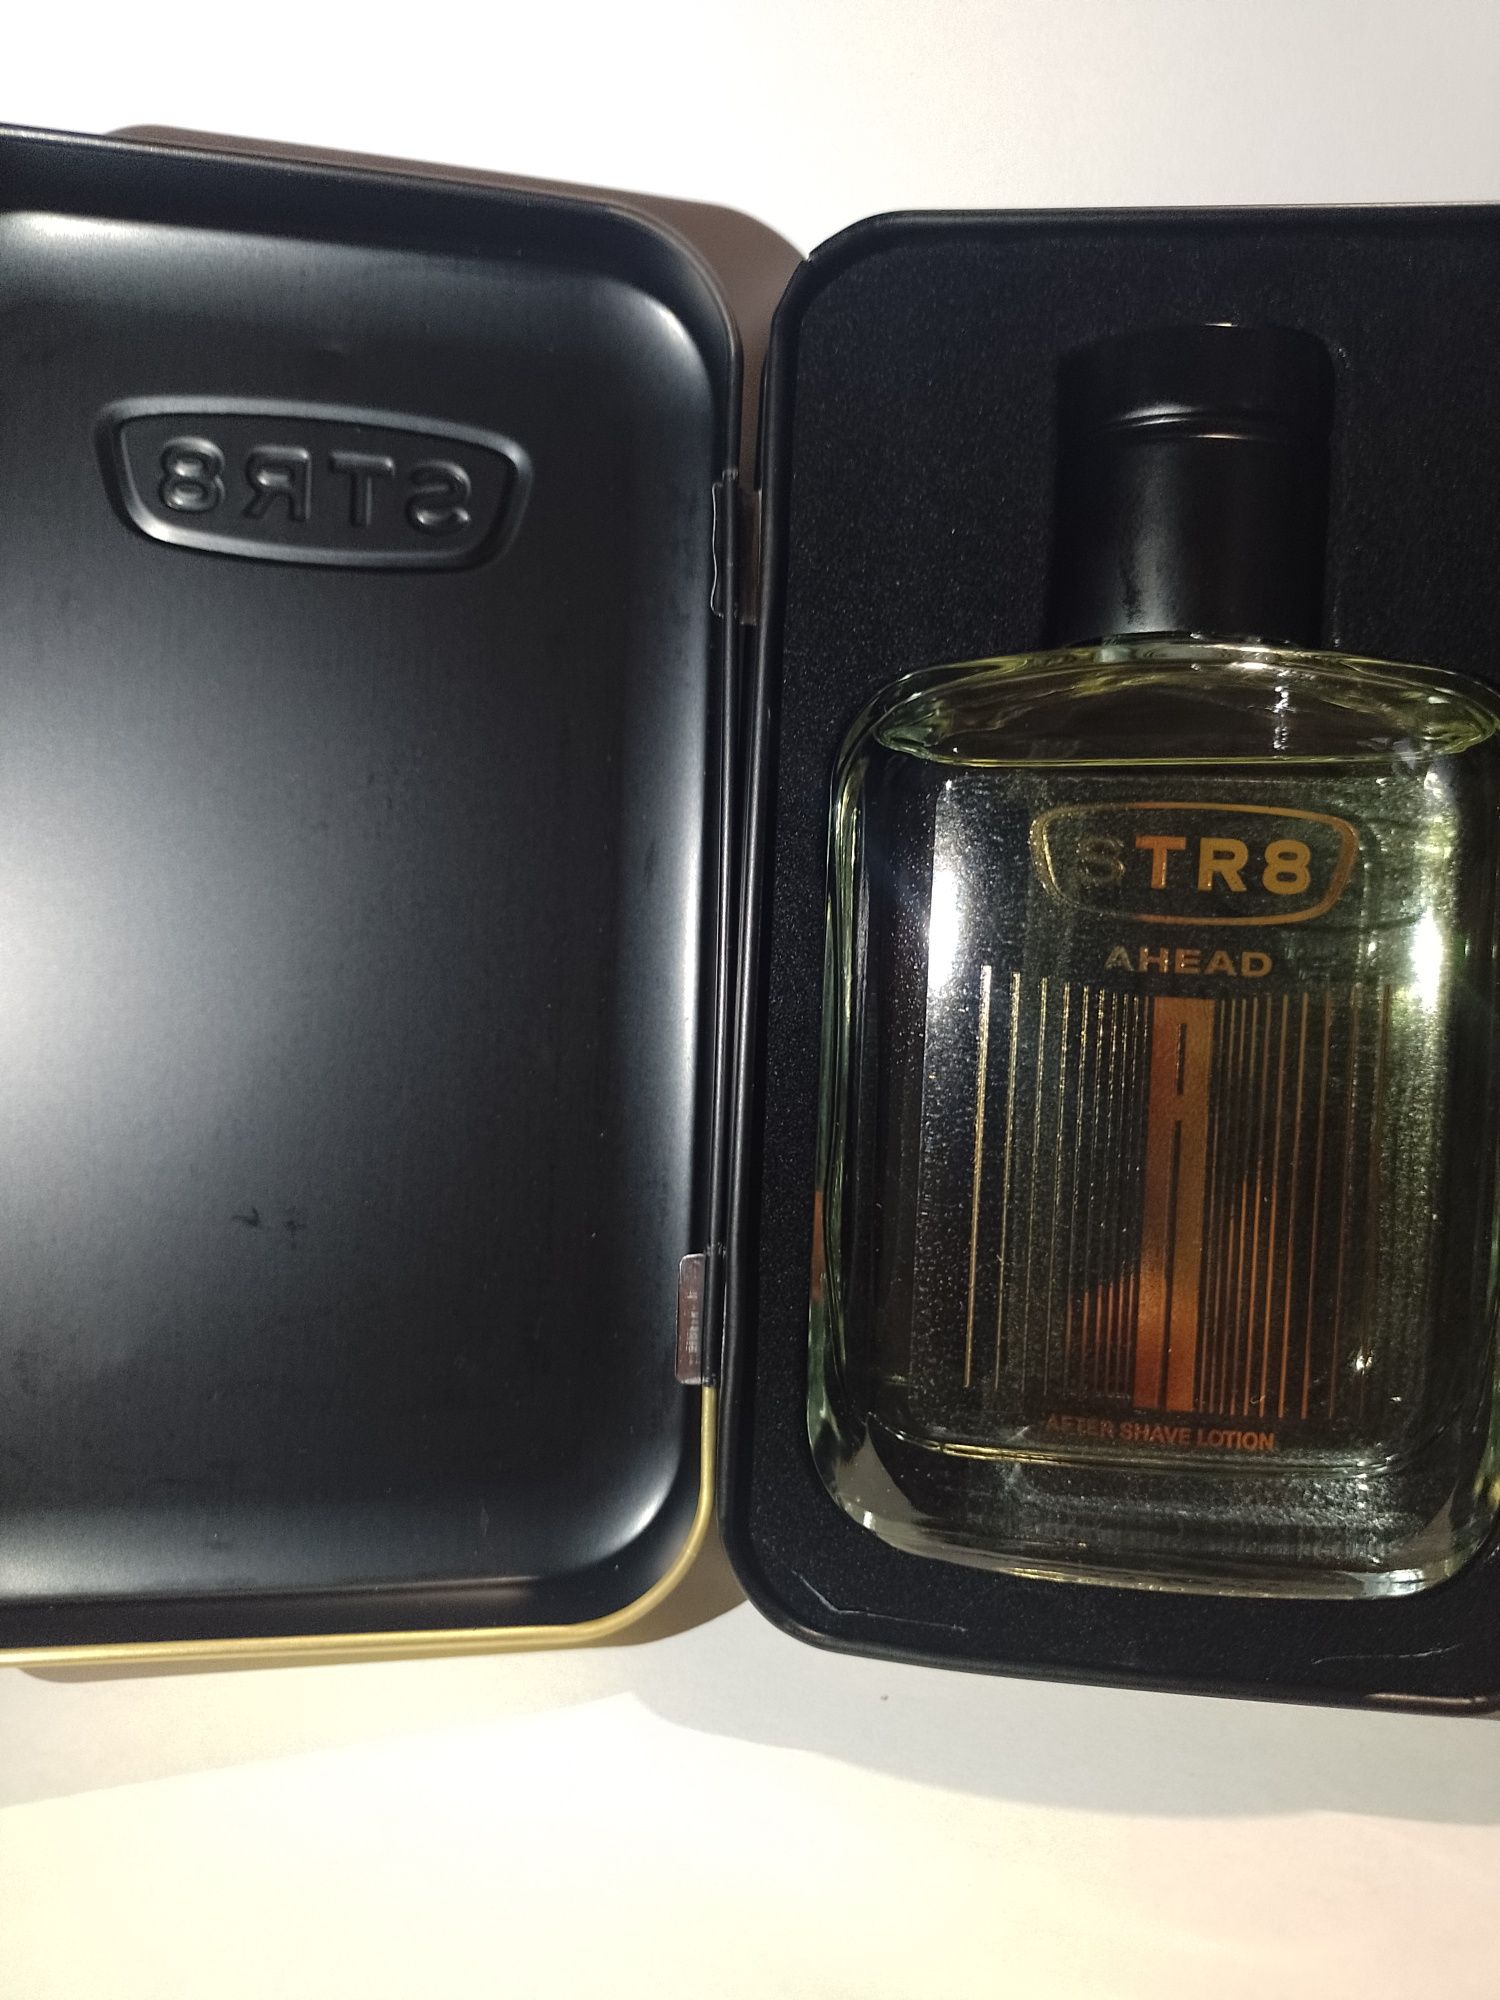 STR8 Ahead after shave 100мл